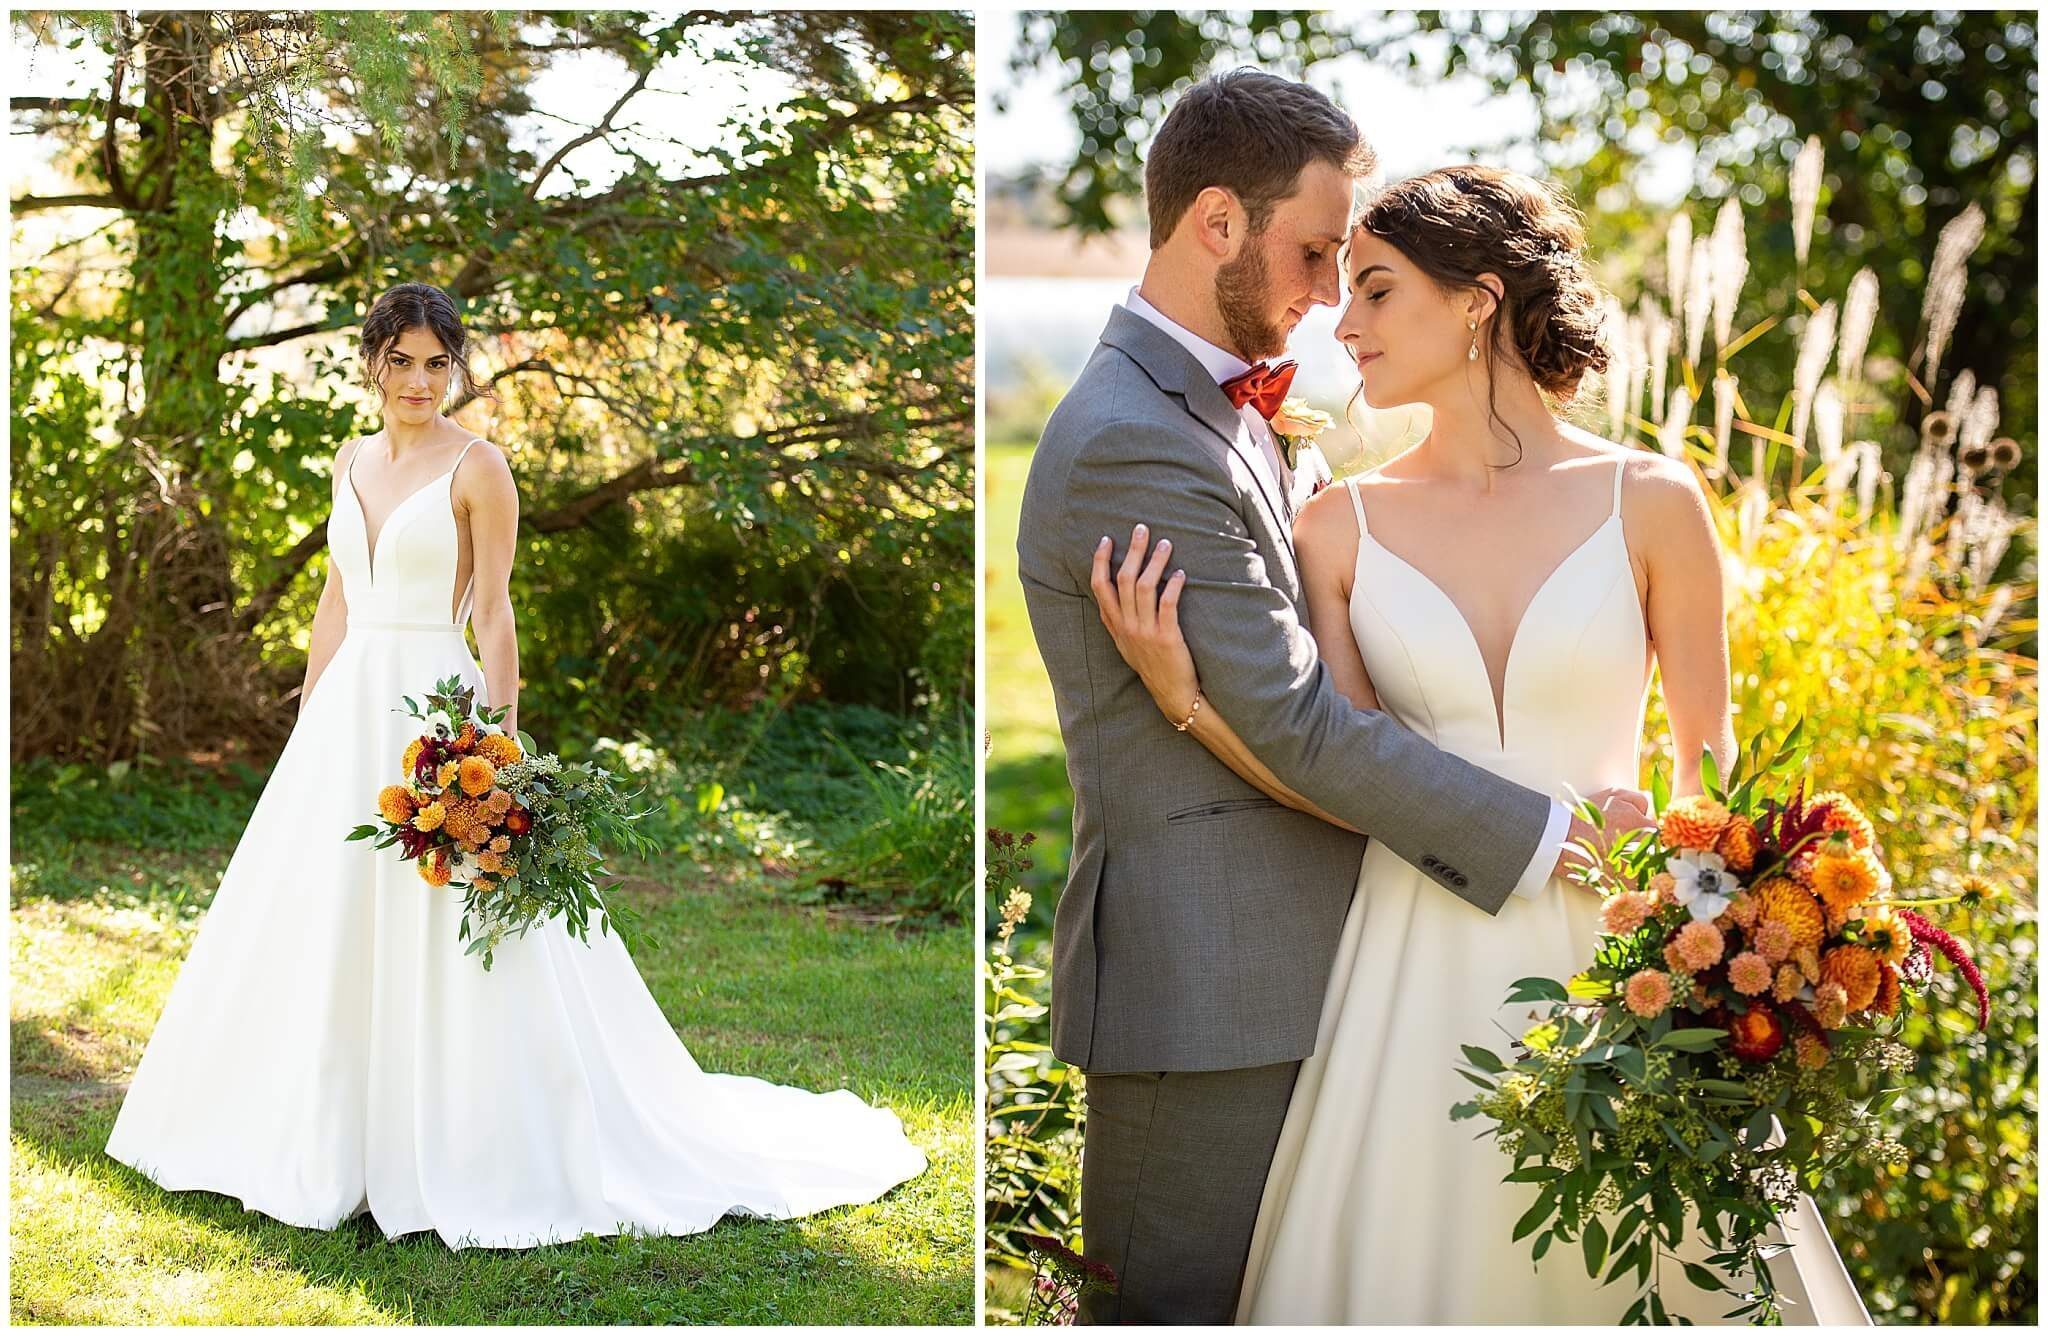 a bride holding a fall coloured bouquet embracing a groom in a grey suit. Captured outdoors at Strathmere weddings by JEMMAN Photography